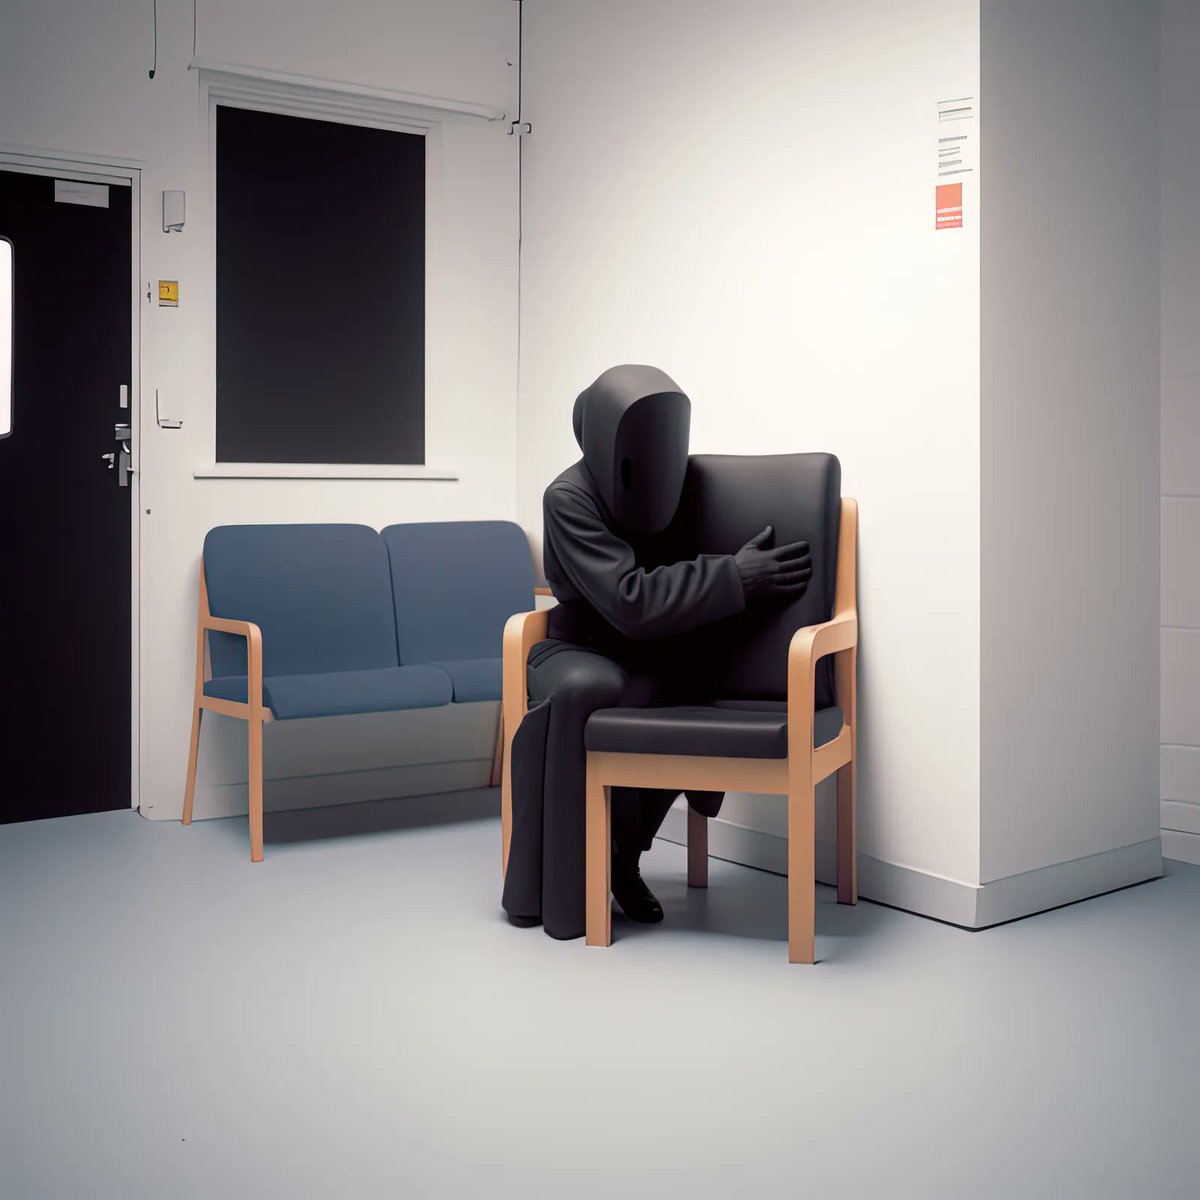 sitting solo chair locker indoors faceless pants  illustration images